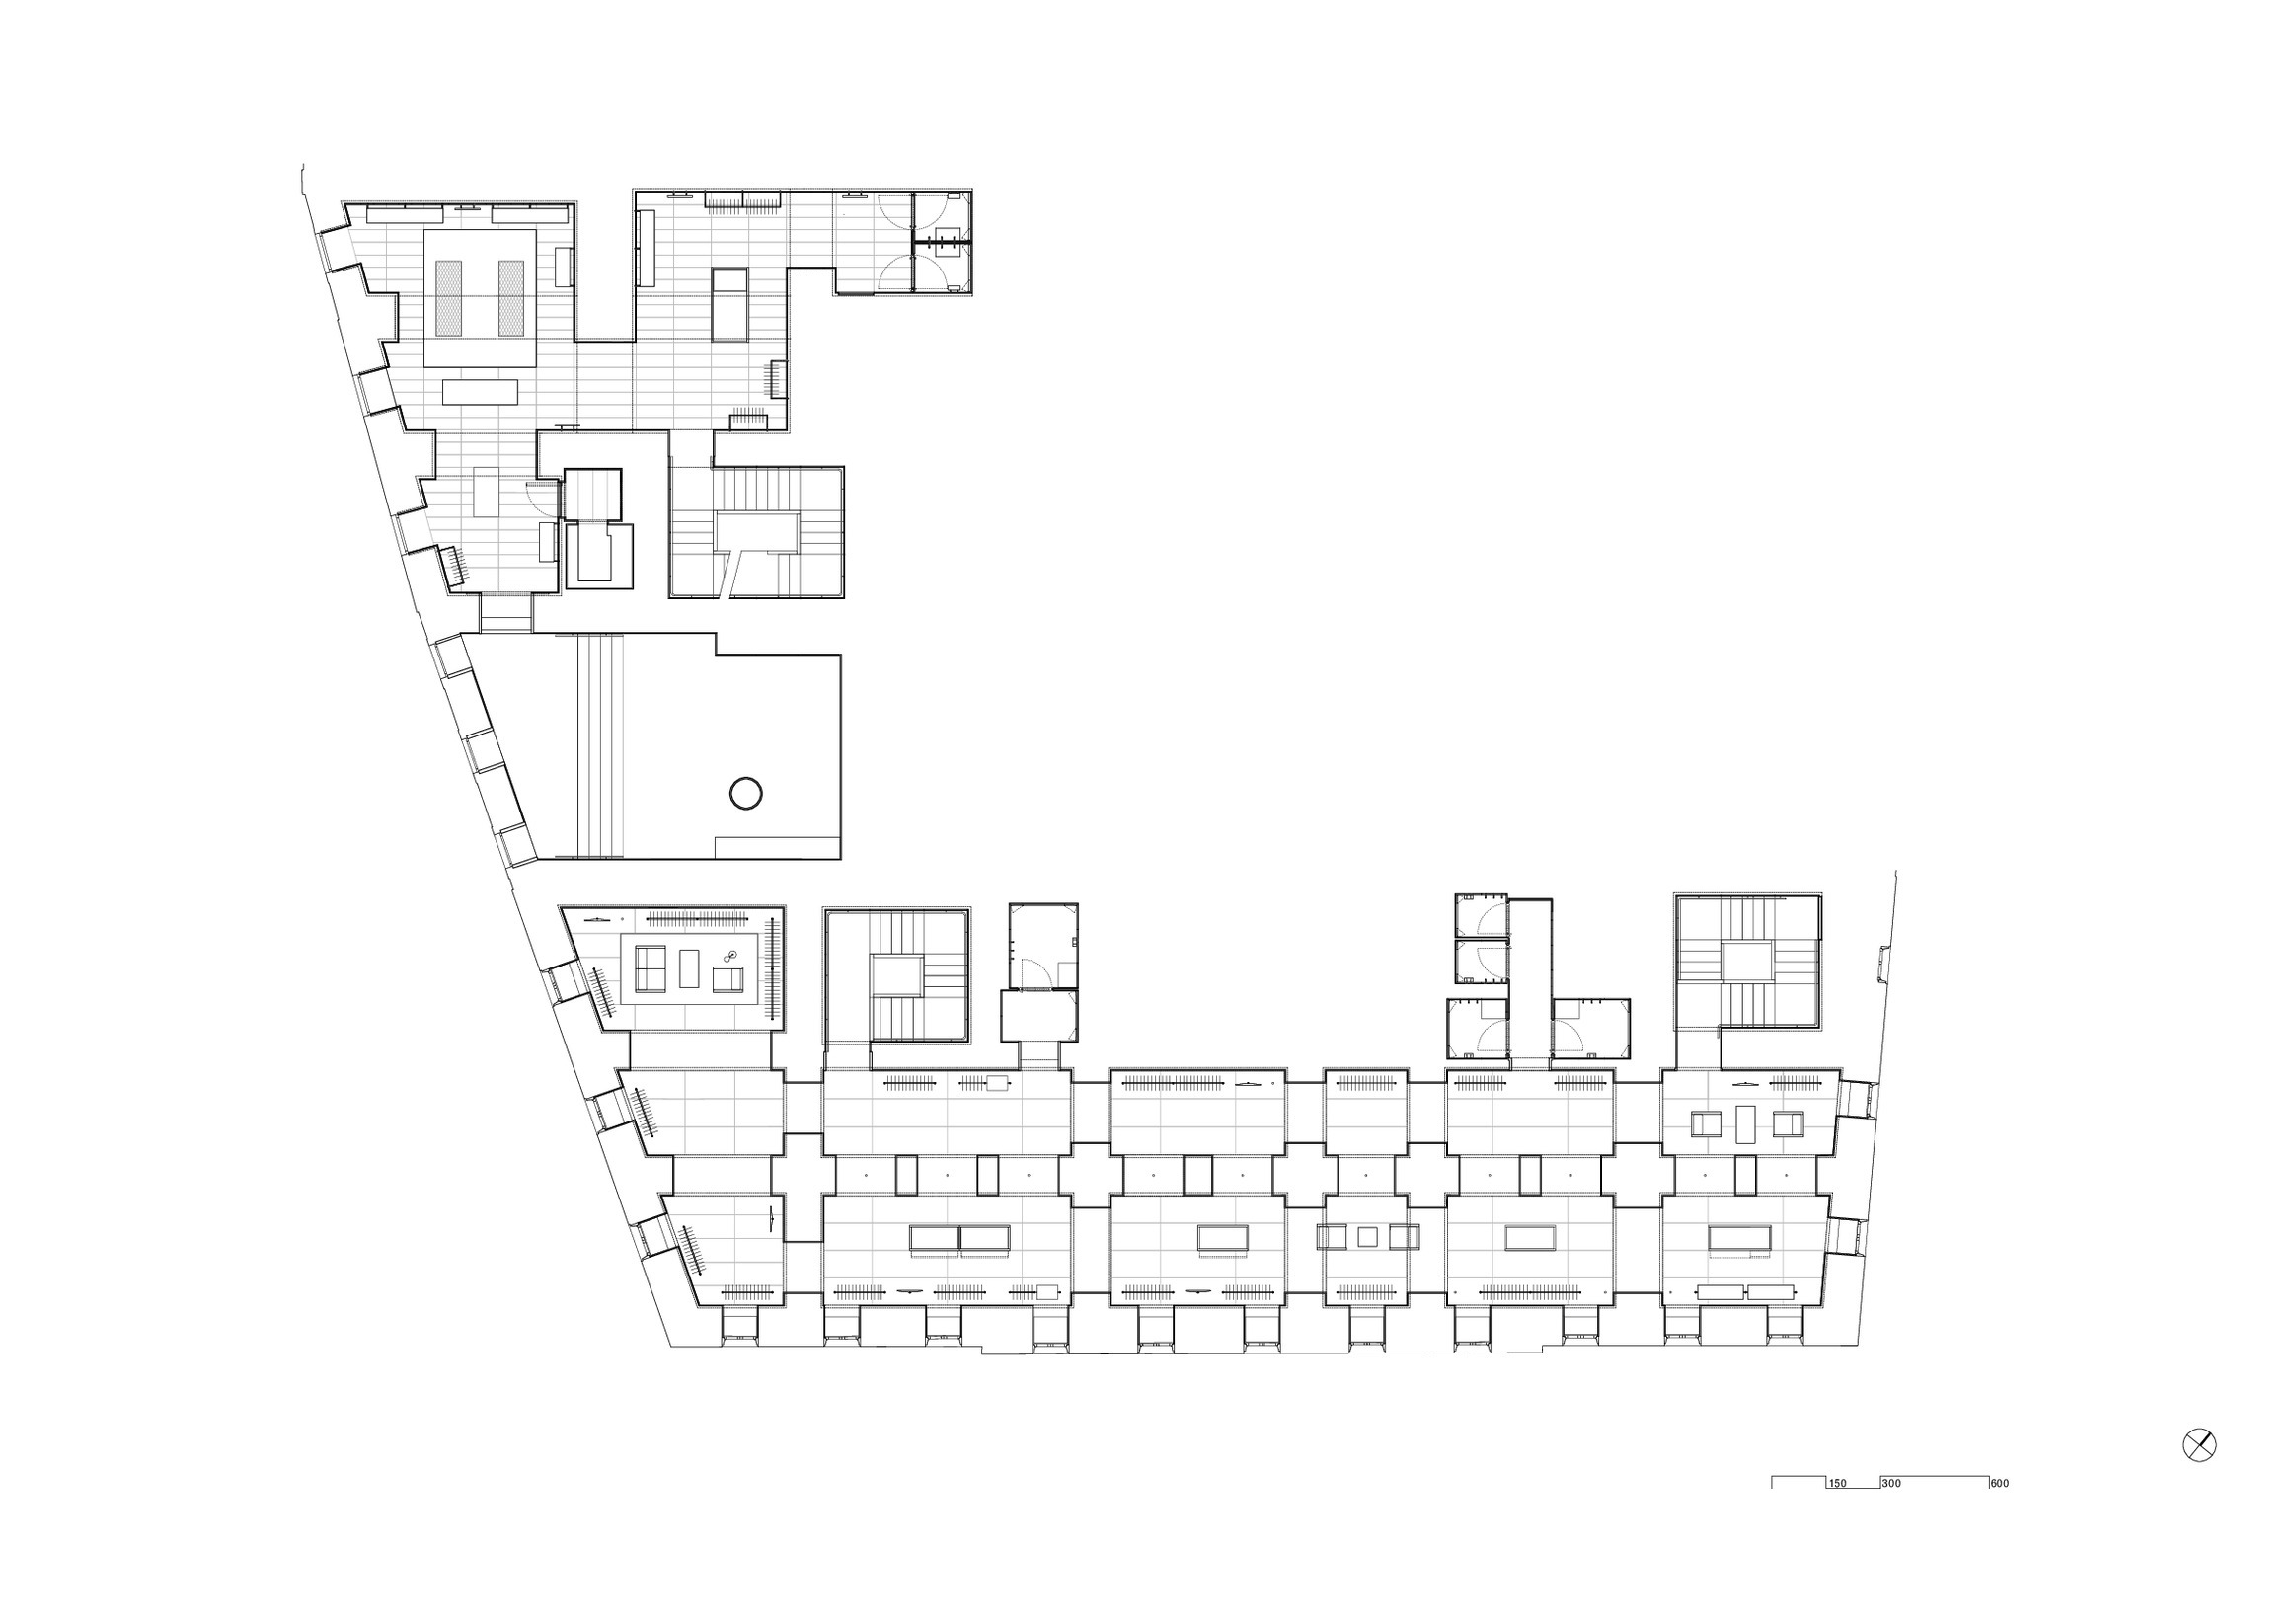 Valentino Flagship Store in Rome, Piazza di Spagna, first floor plan.